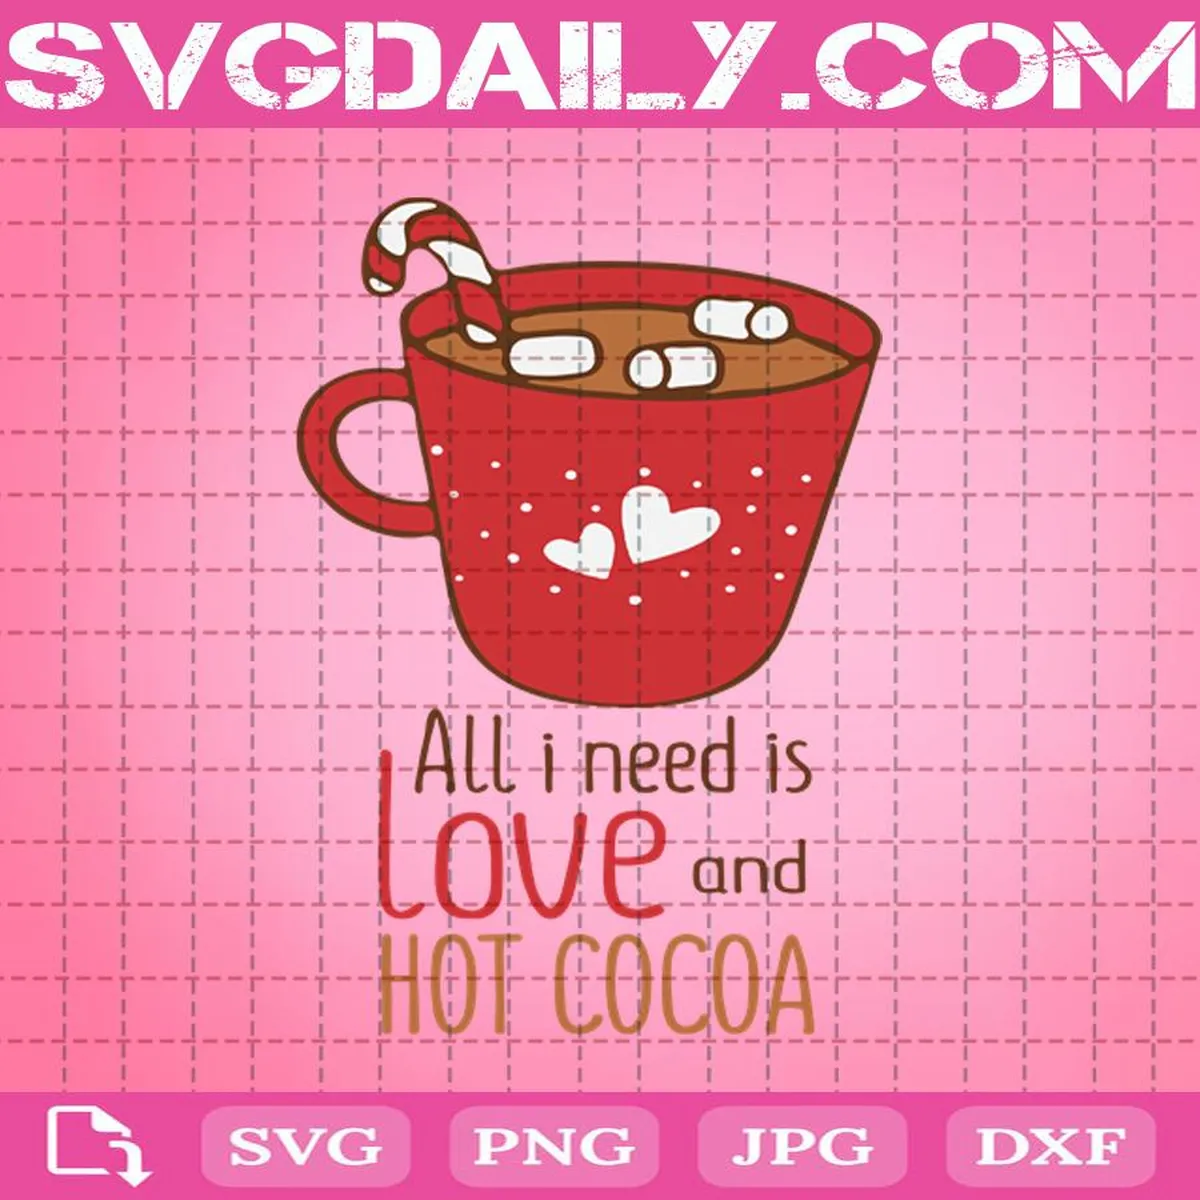 All I Need Is Love And Hot Cocoa Svg, Valentine’s Day Svg, Hot Cocoa Svg, Hot Drink Svg, Saint Valentine Svg, Hearts Svg, Funny Love Svg